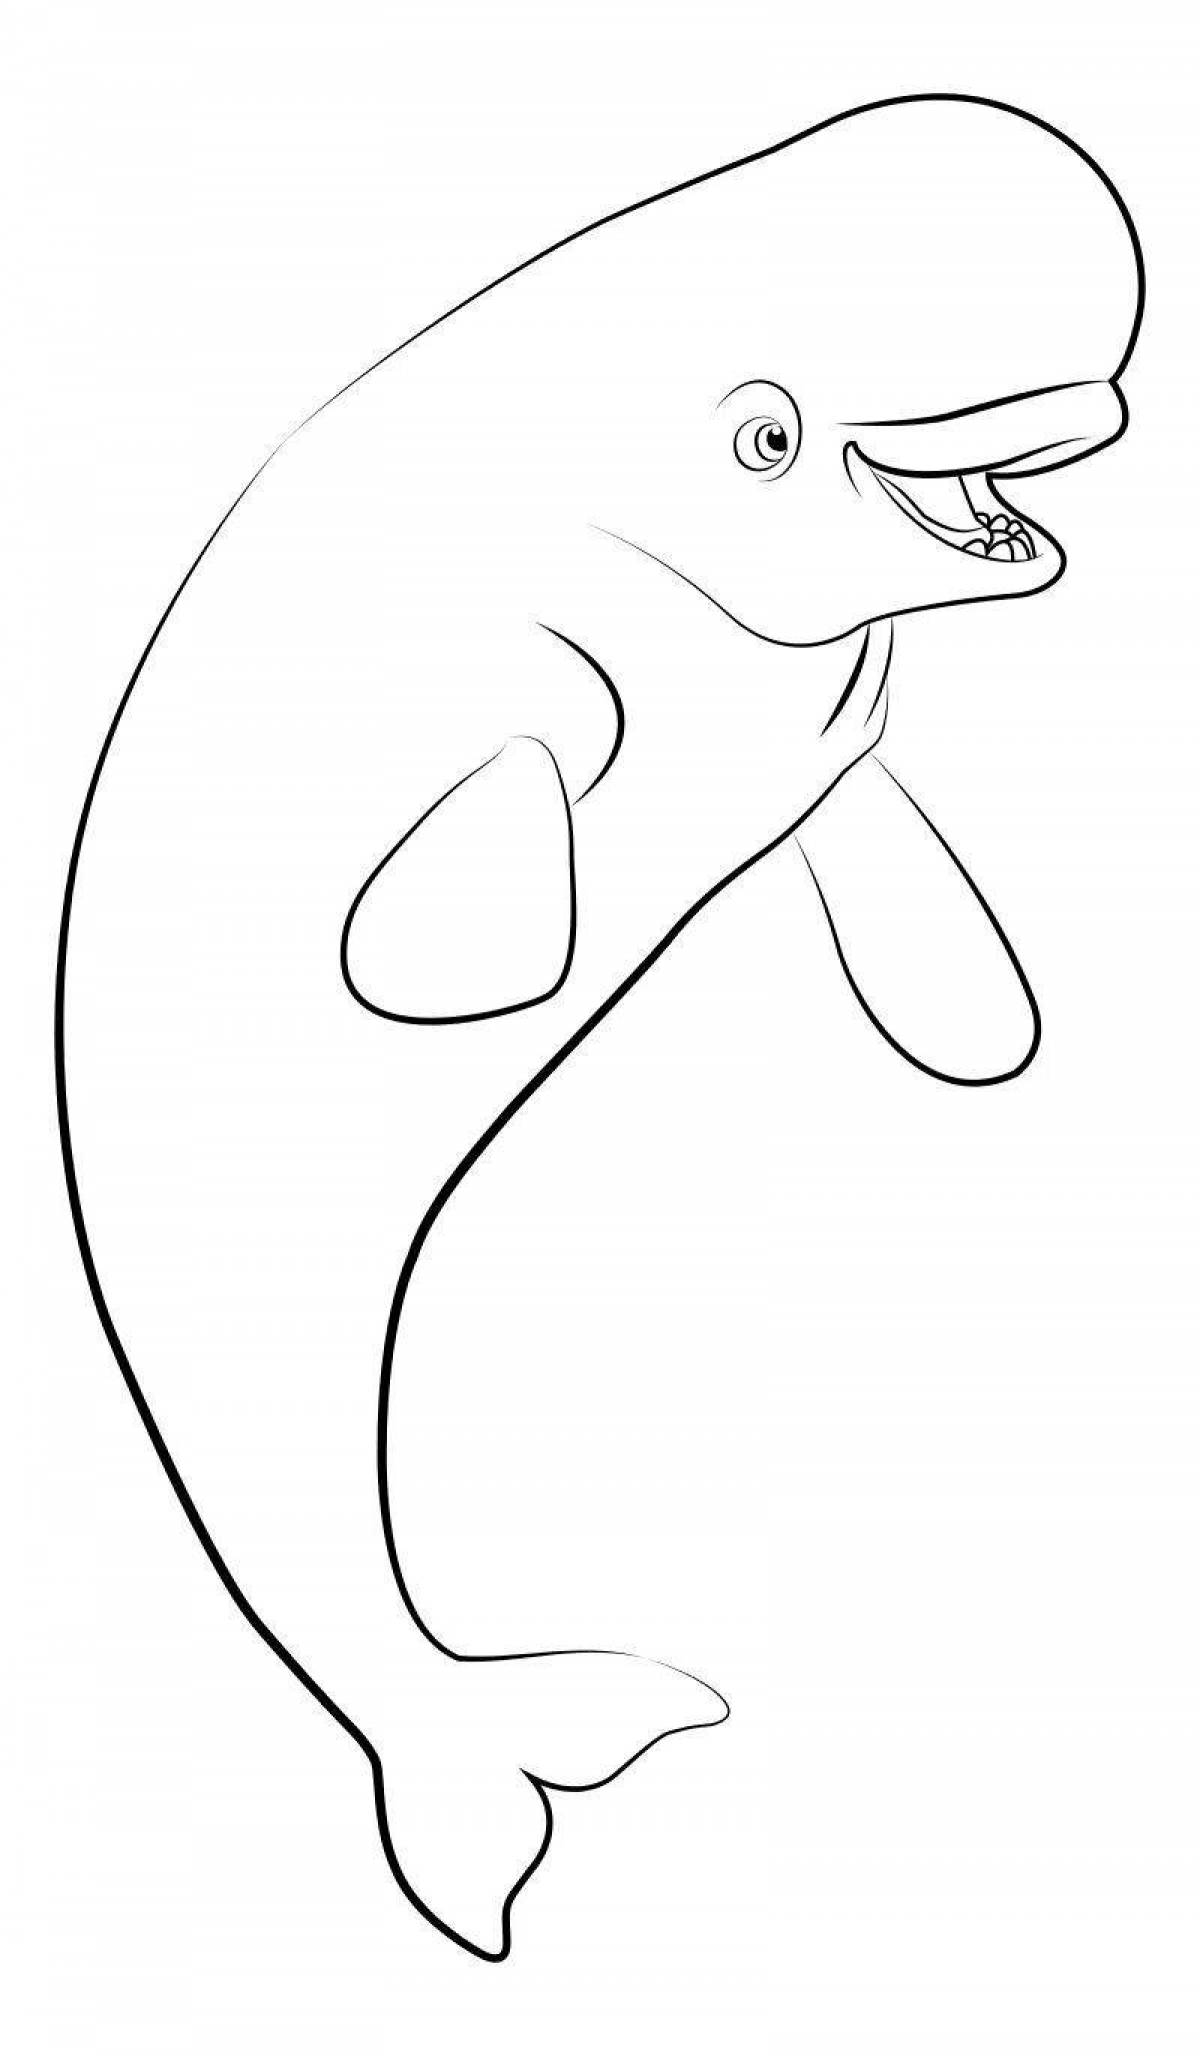 Coloring book dazzling white whale